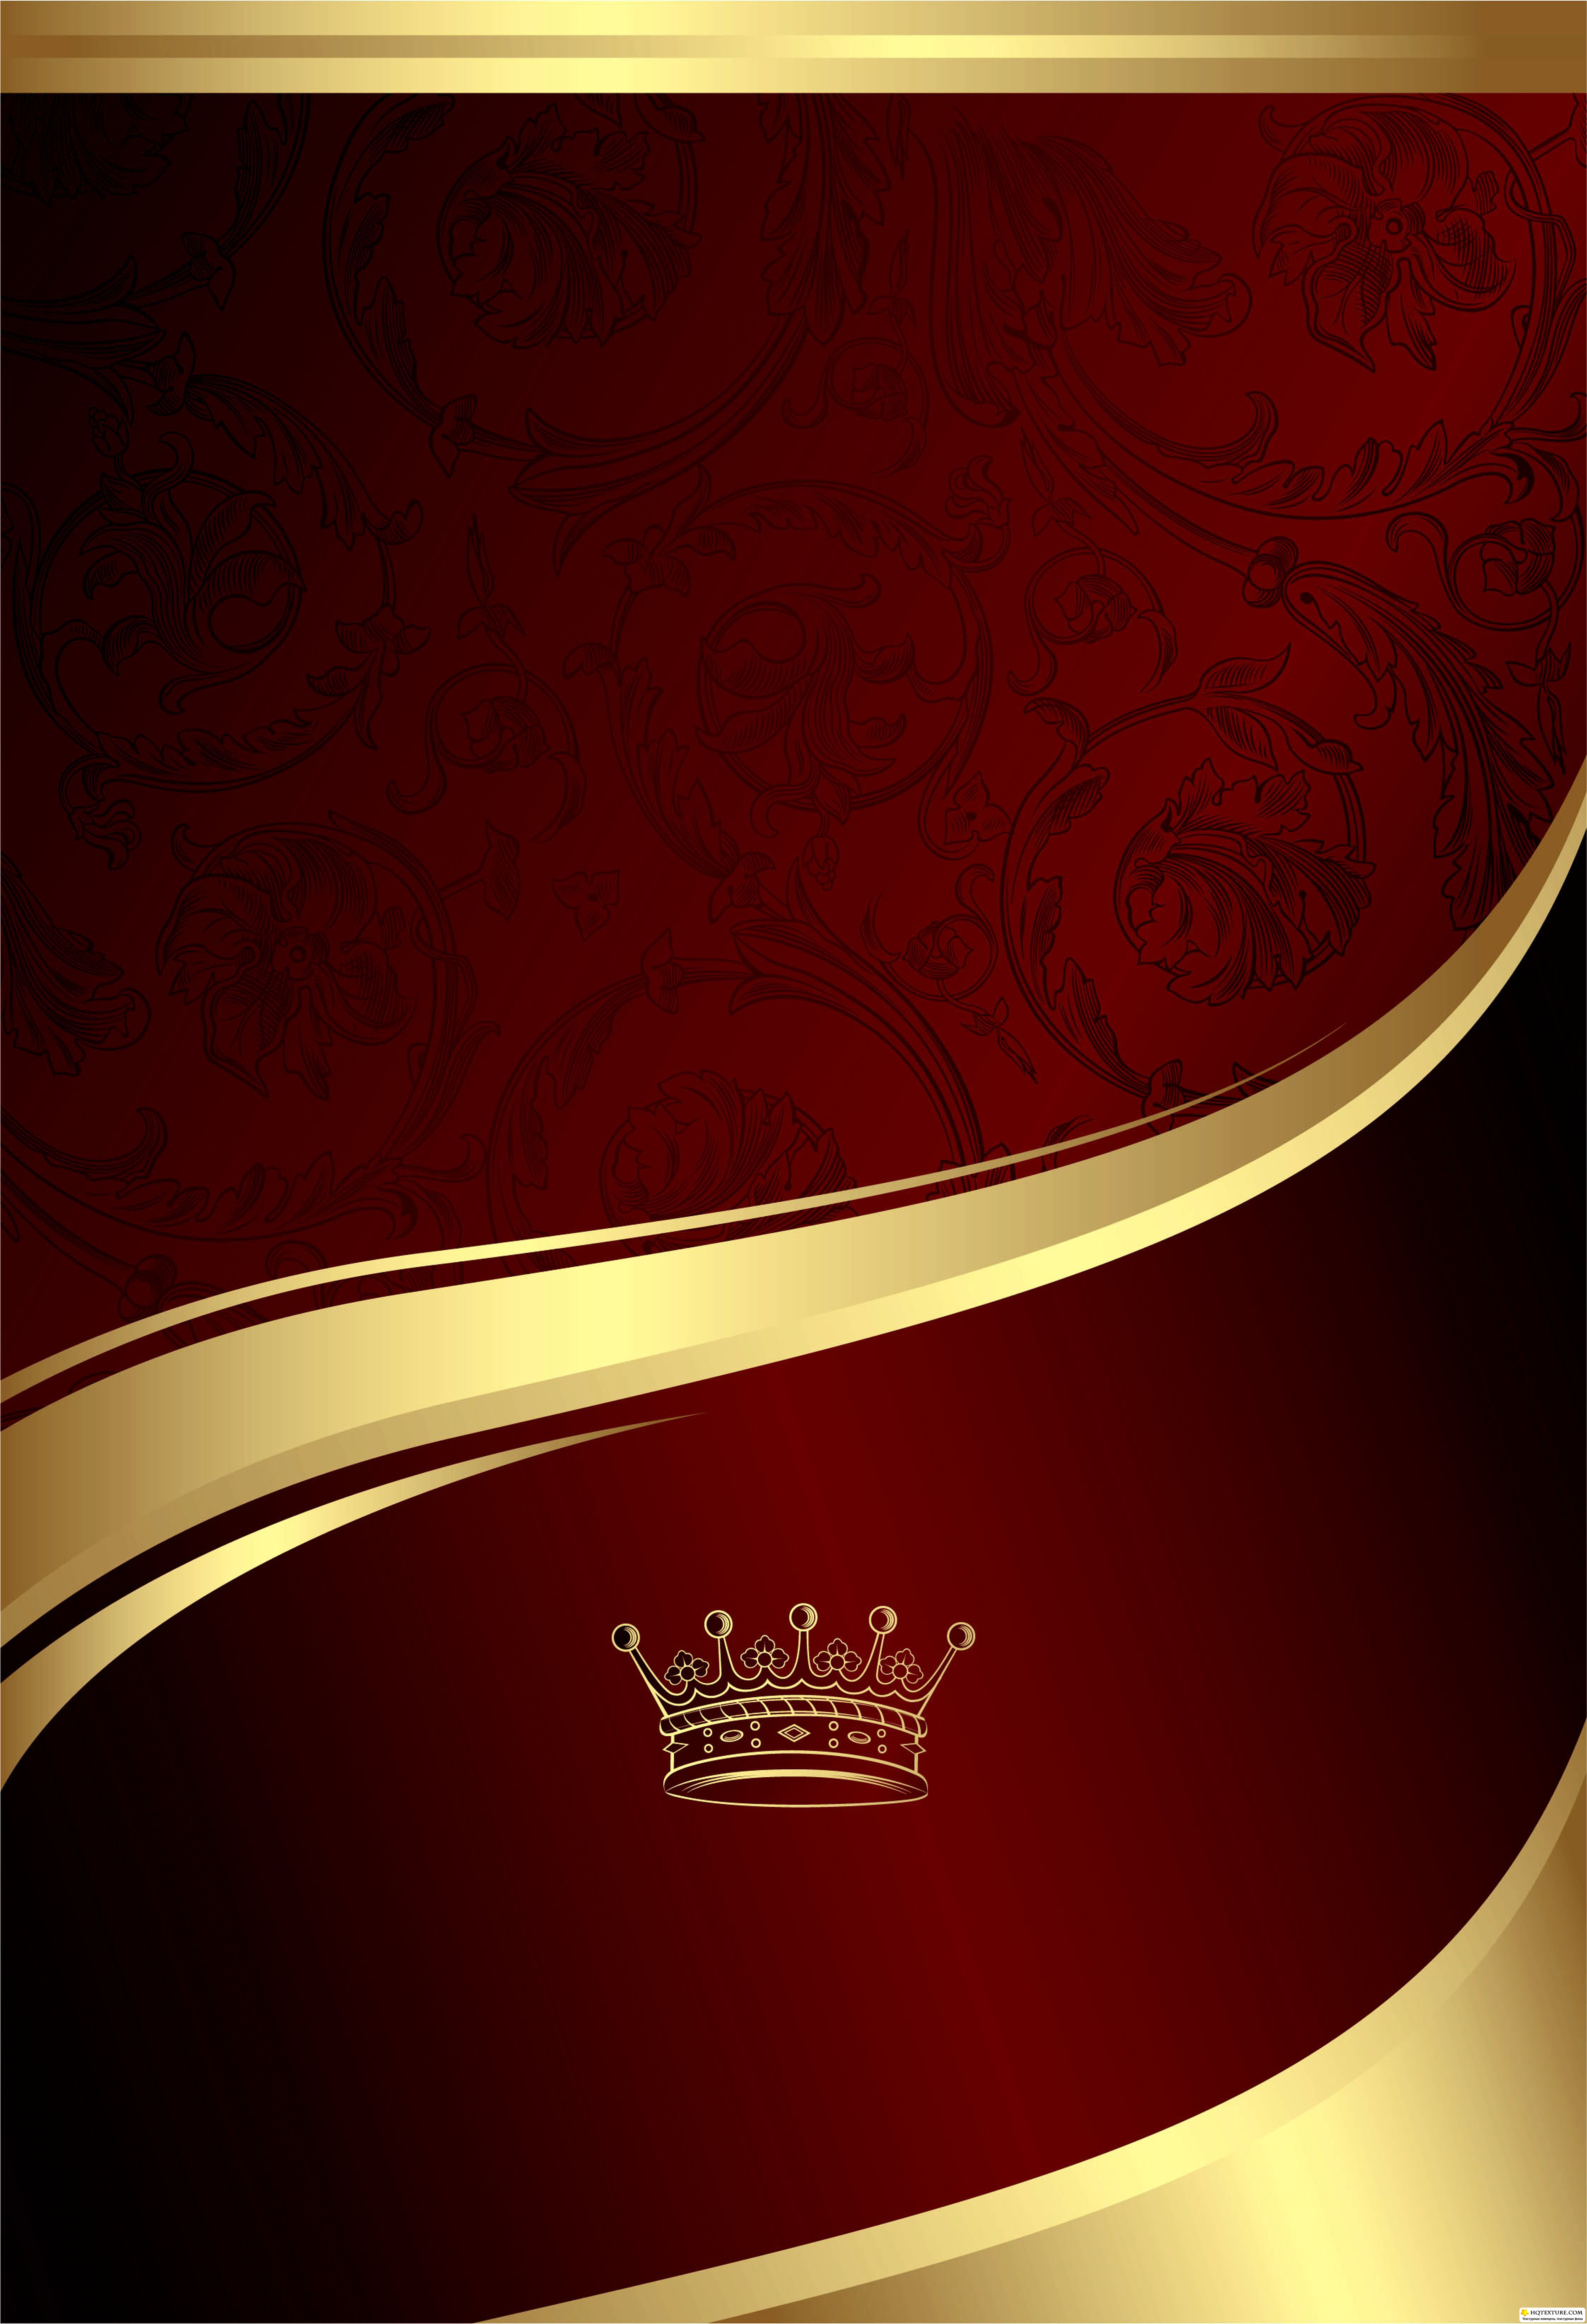 Stock: Gold and Red Floral Royal Background » Векторные ...